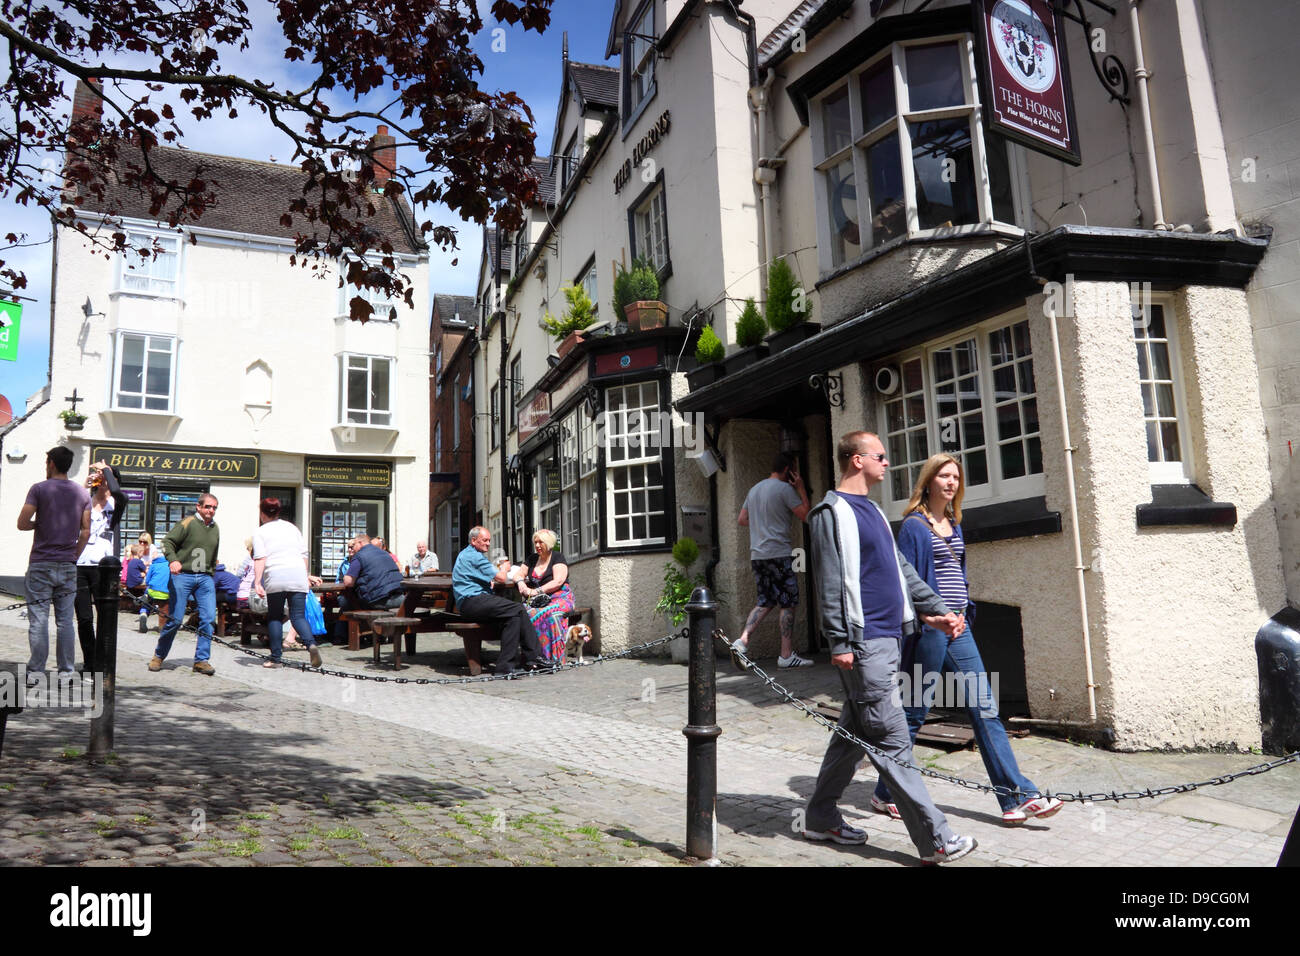 People outside a pub in the pretty market town of Ashbourne, Derbyshire, England Stock Photo